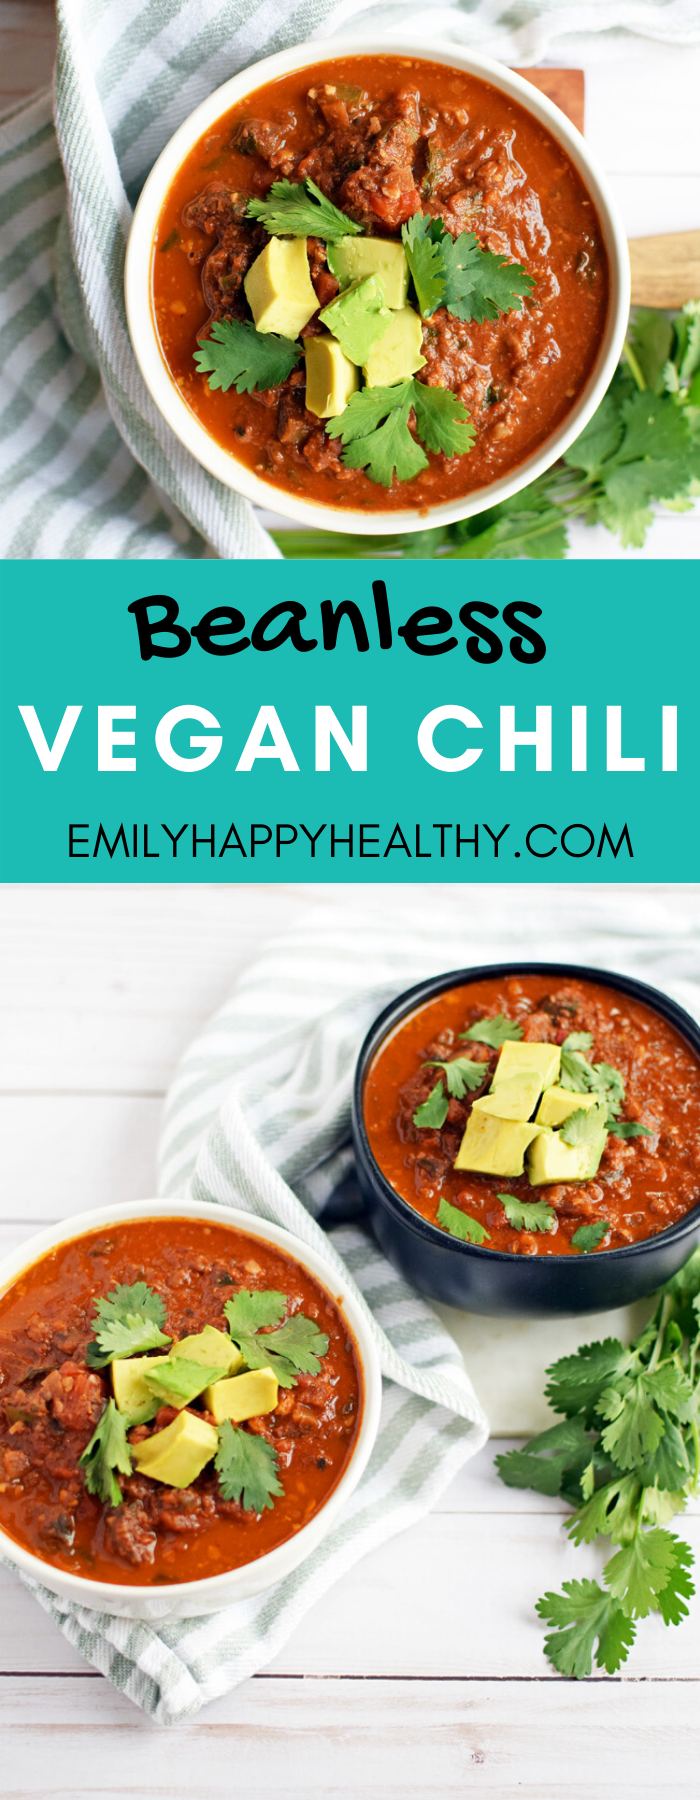 confessions of a fit foodie beanless chili